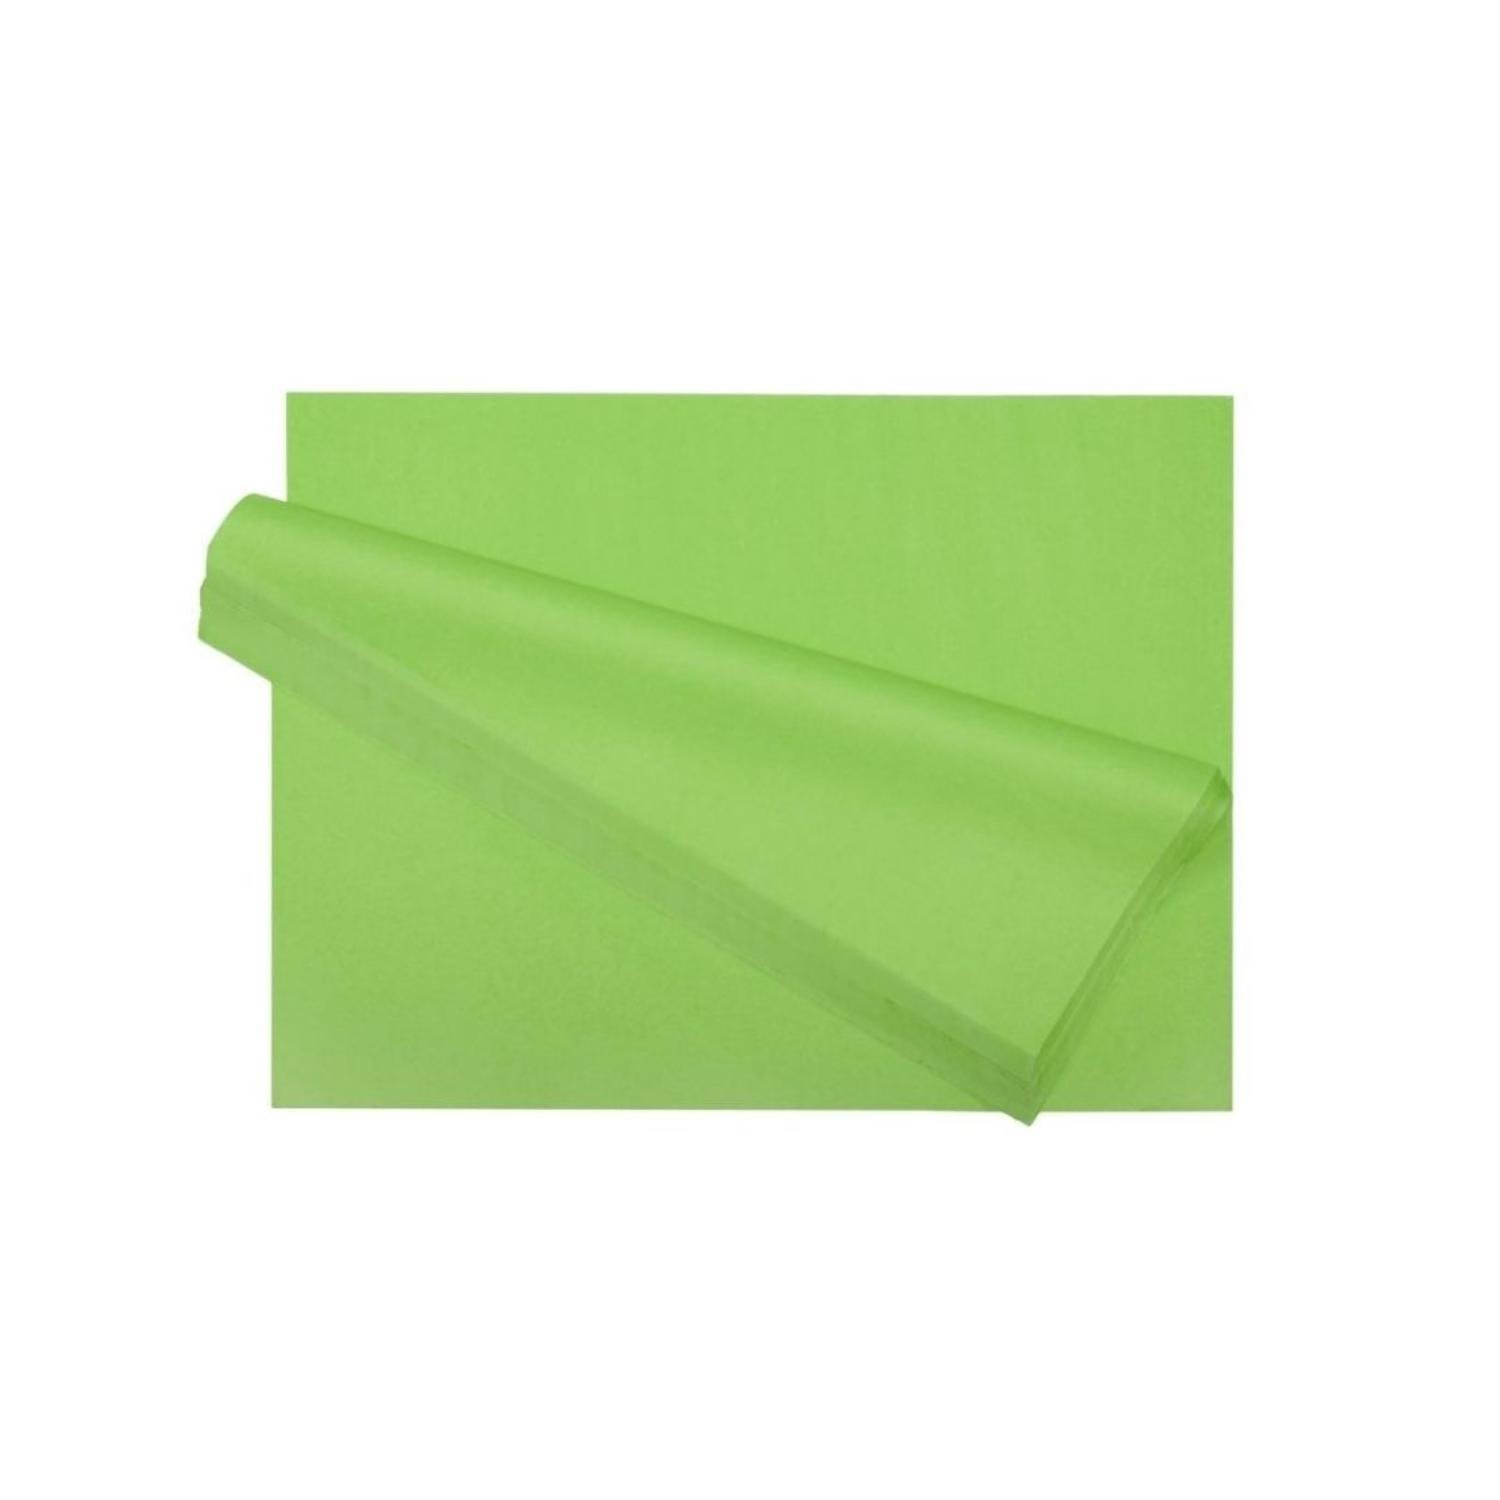 LIME TISSUE REAM 15" X 20" - 480 SHEETS